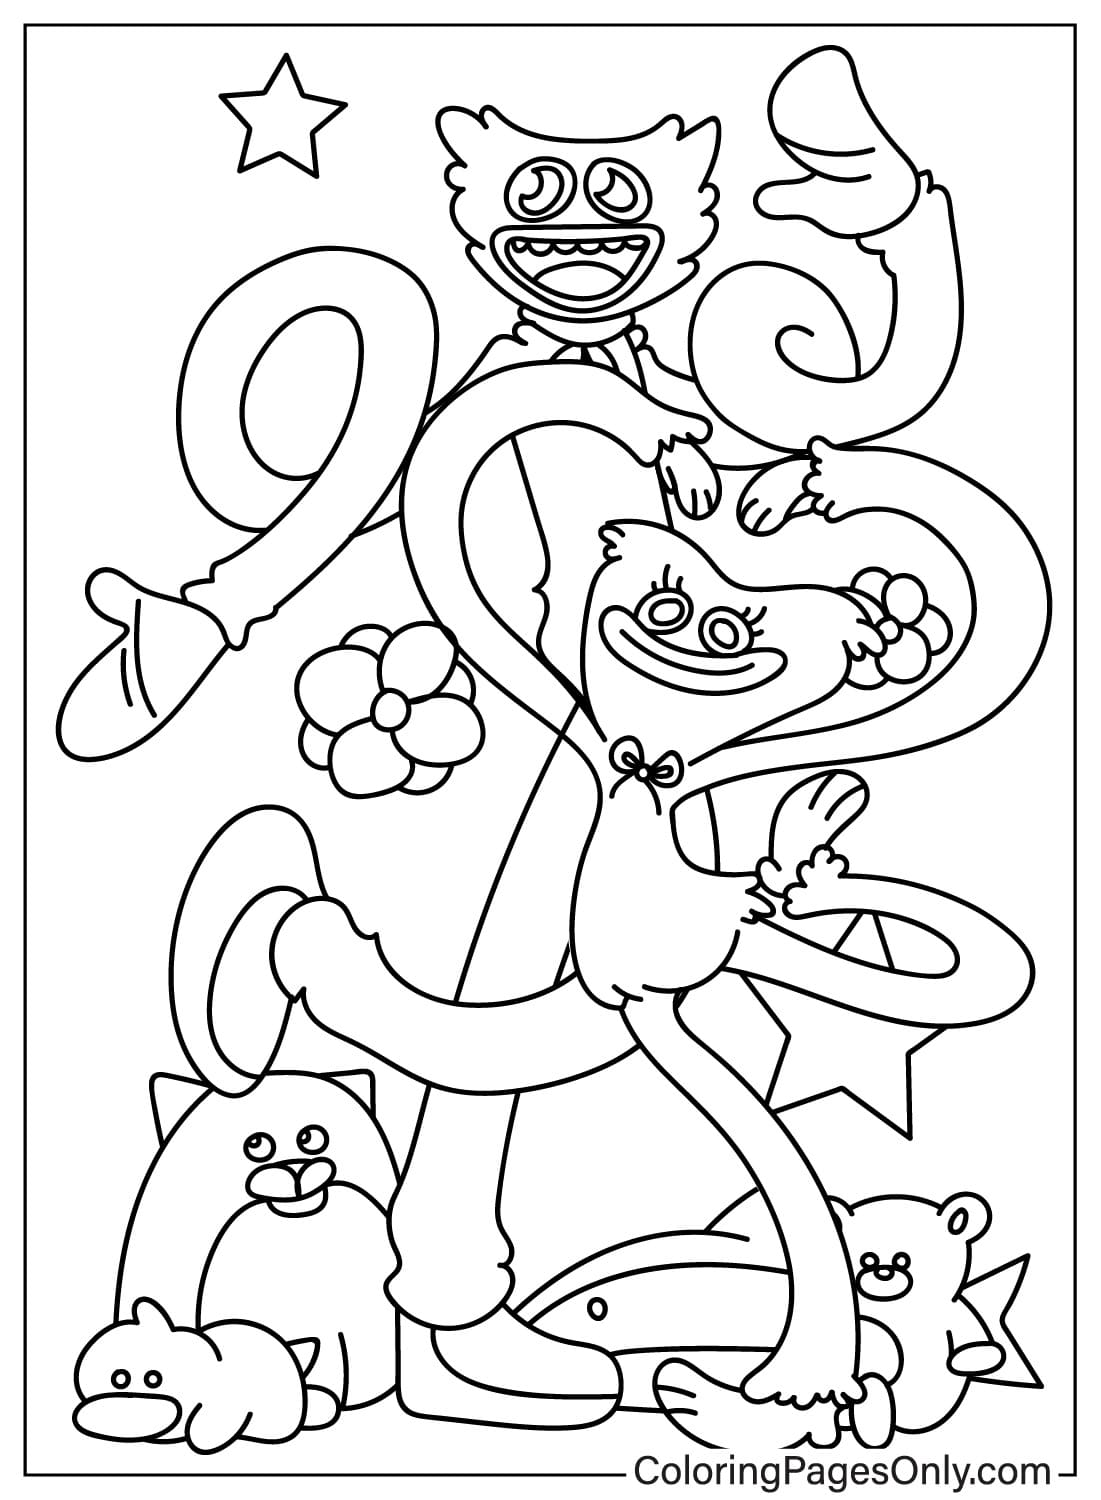 Coloriage Huggy Wuggy avec Kissy Missy de Huggy Wuggy